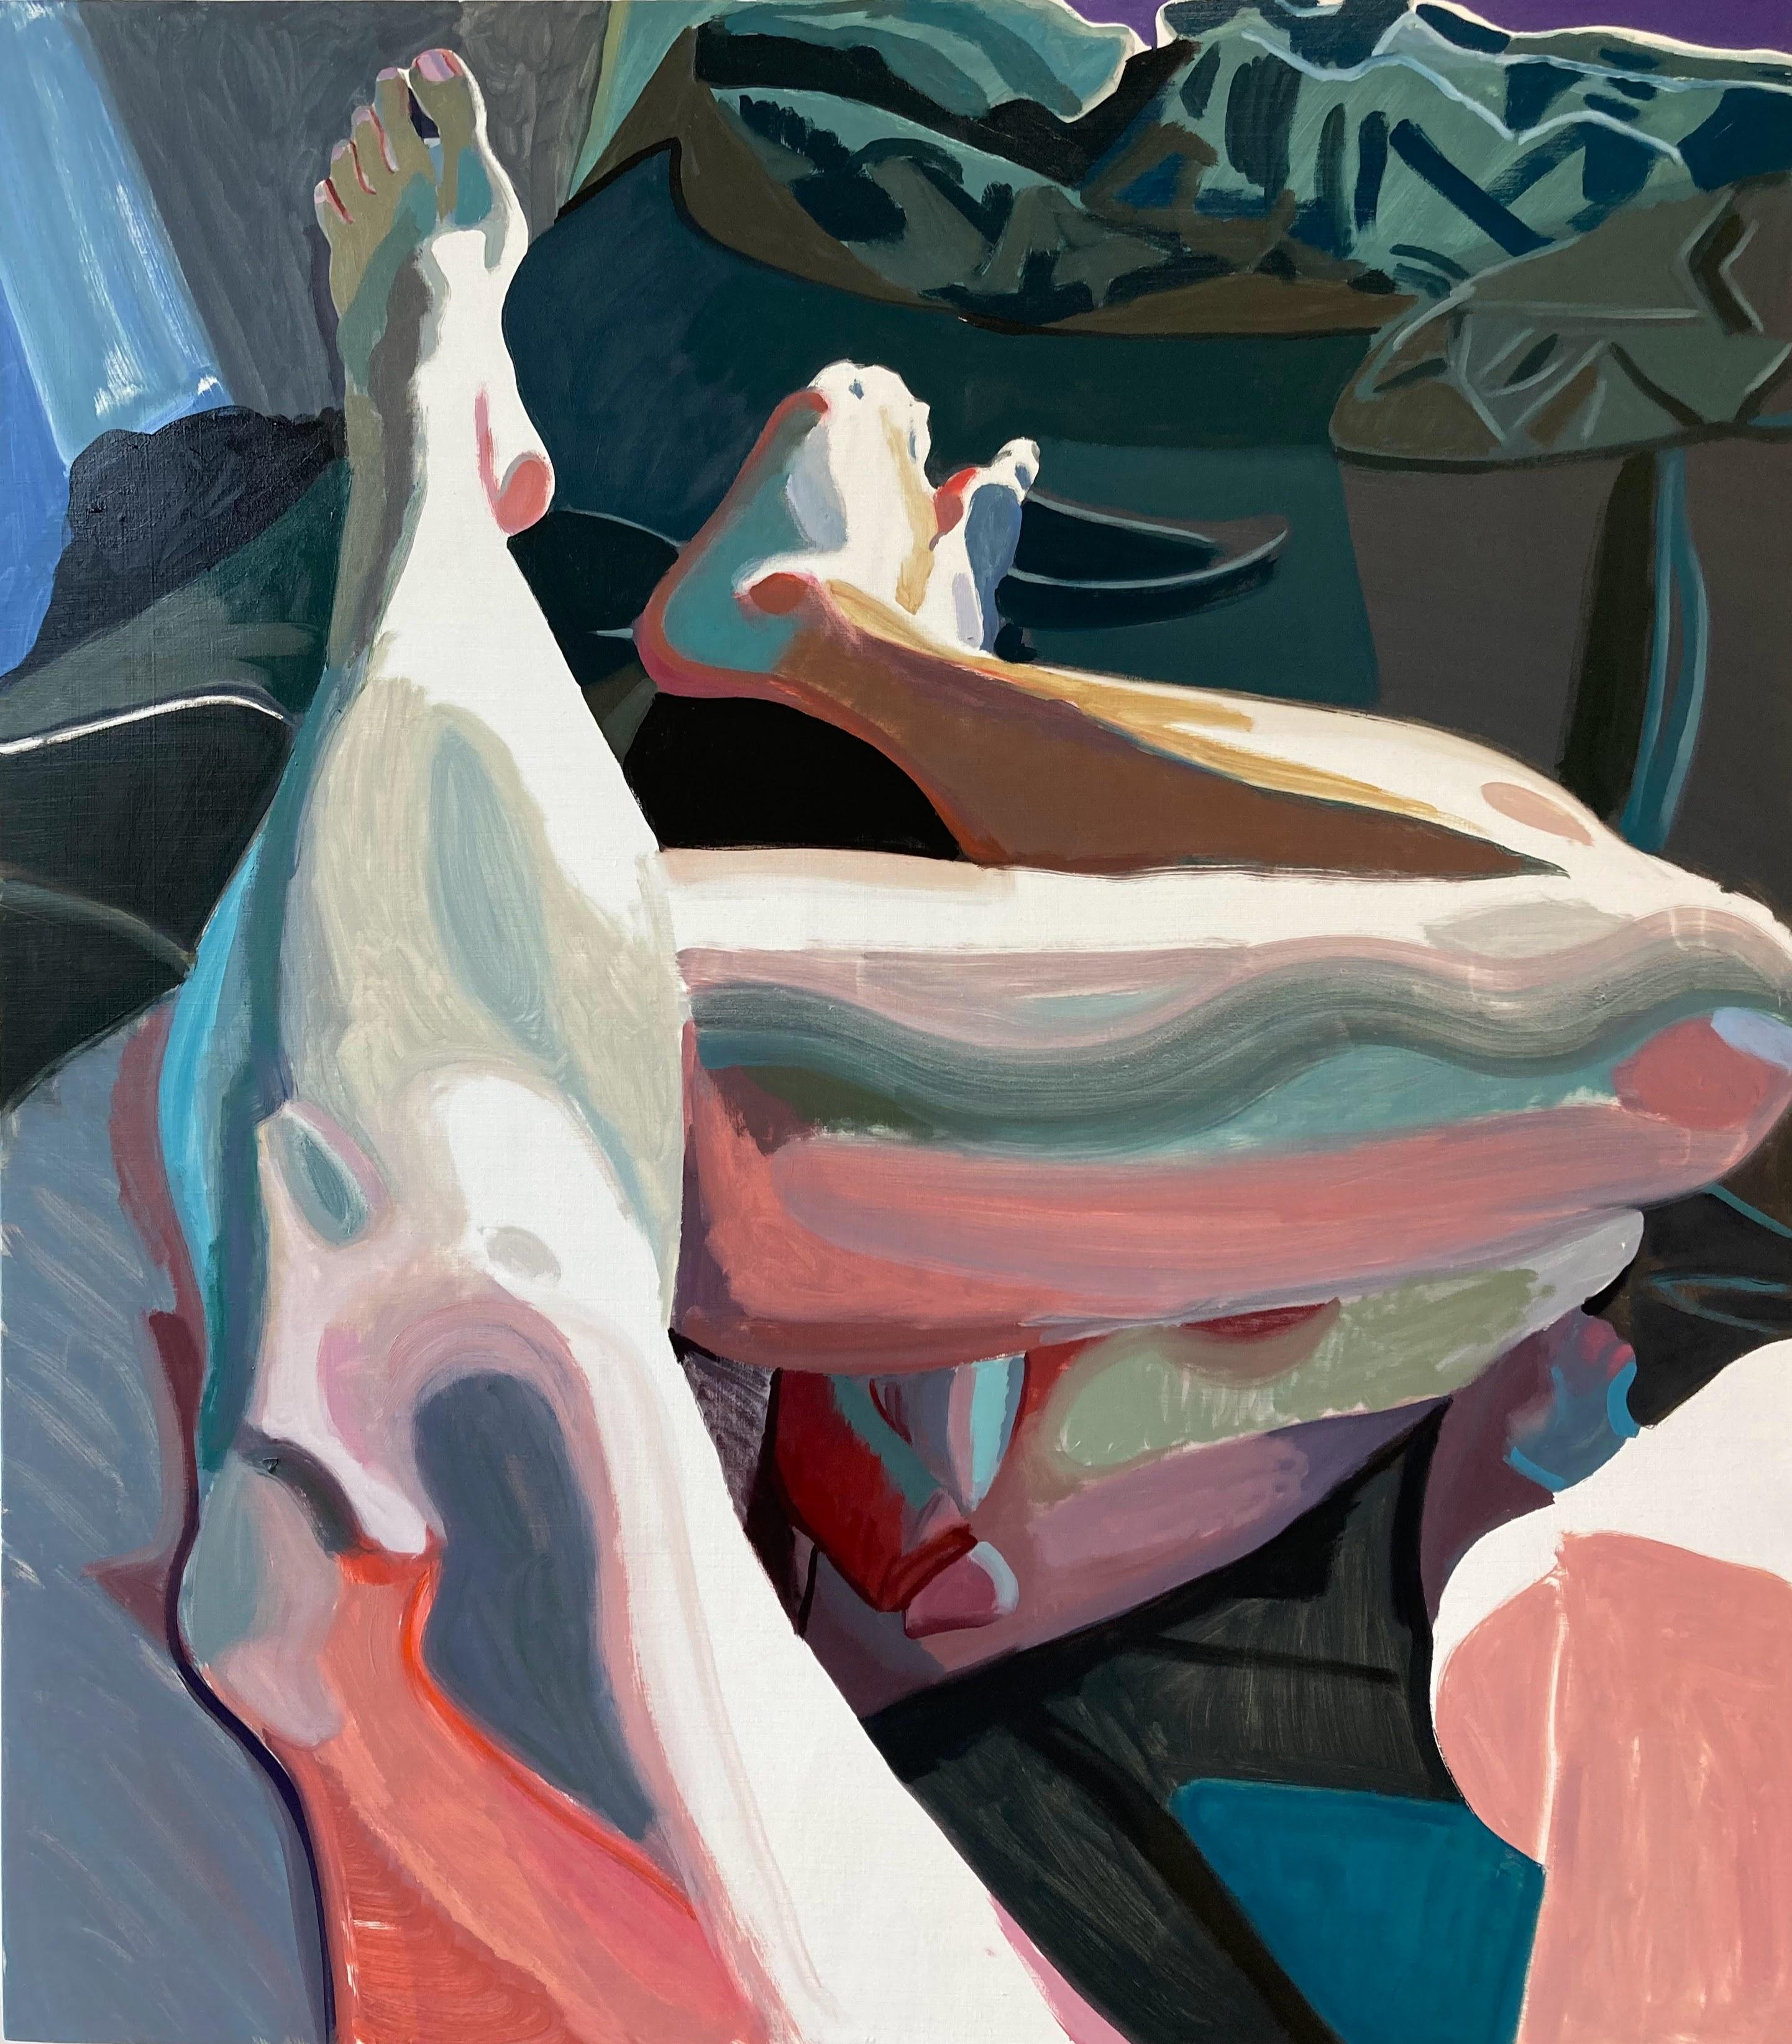 Chelsea Gibson Figurative Painting - "Tidal Bodies" - Contemporary Figurative Oil Painting 